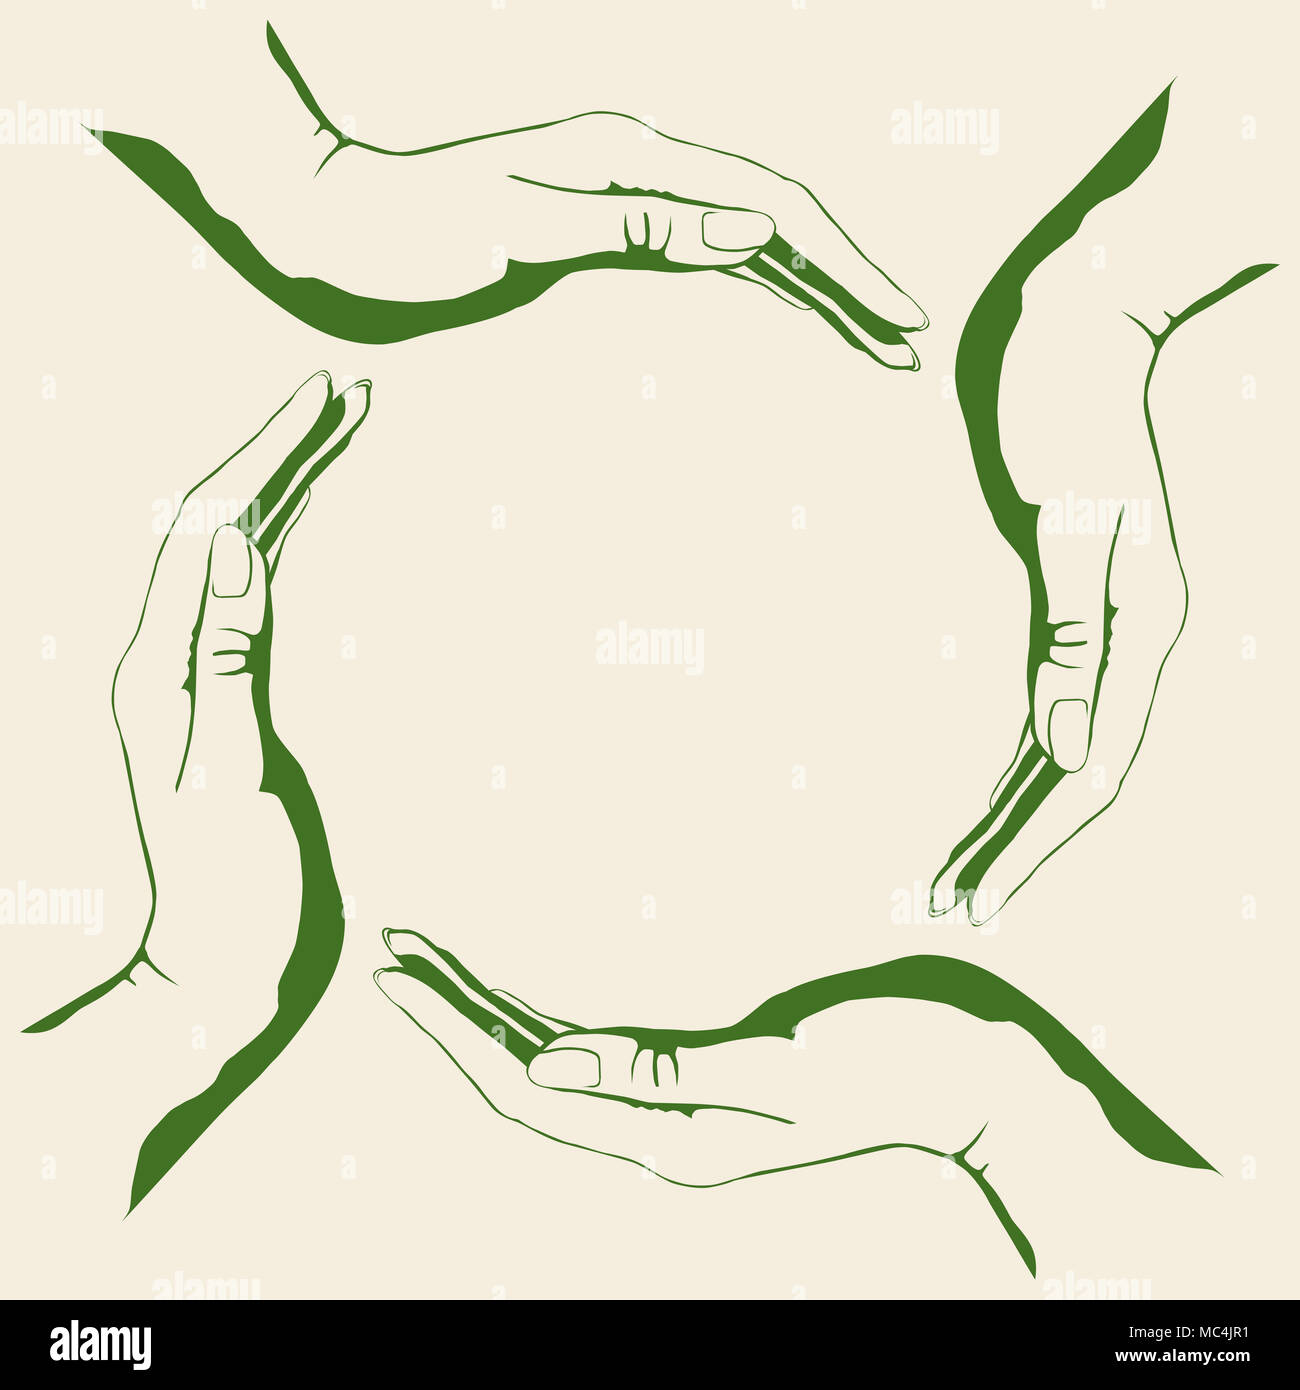 Four people hands making circle conceptual green round symbol, eco-friendly, sustainability and environment concept, isolated illustration on white ba Stock Photo